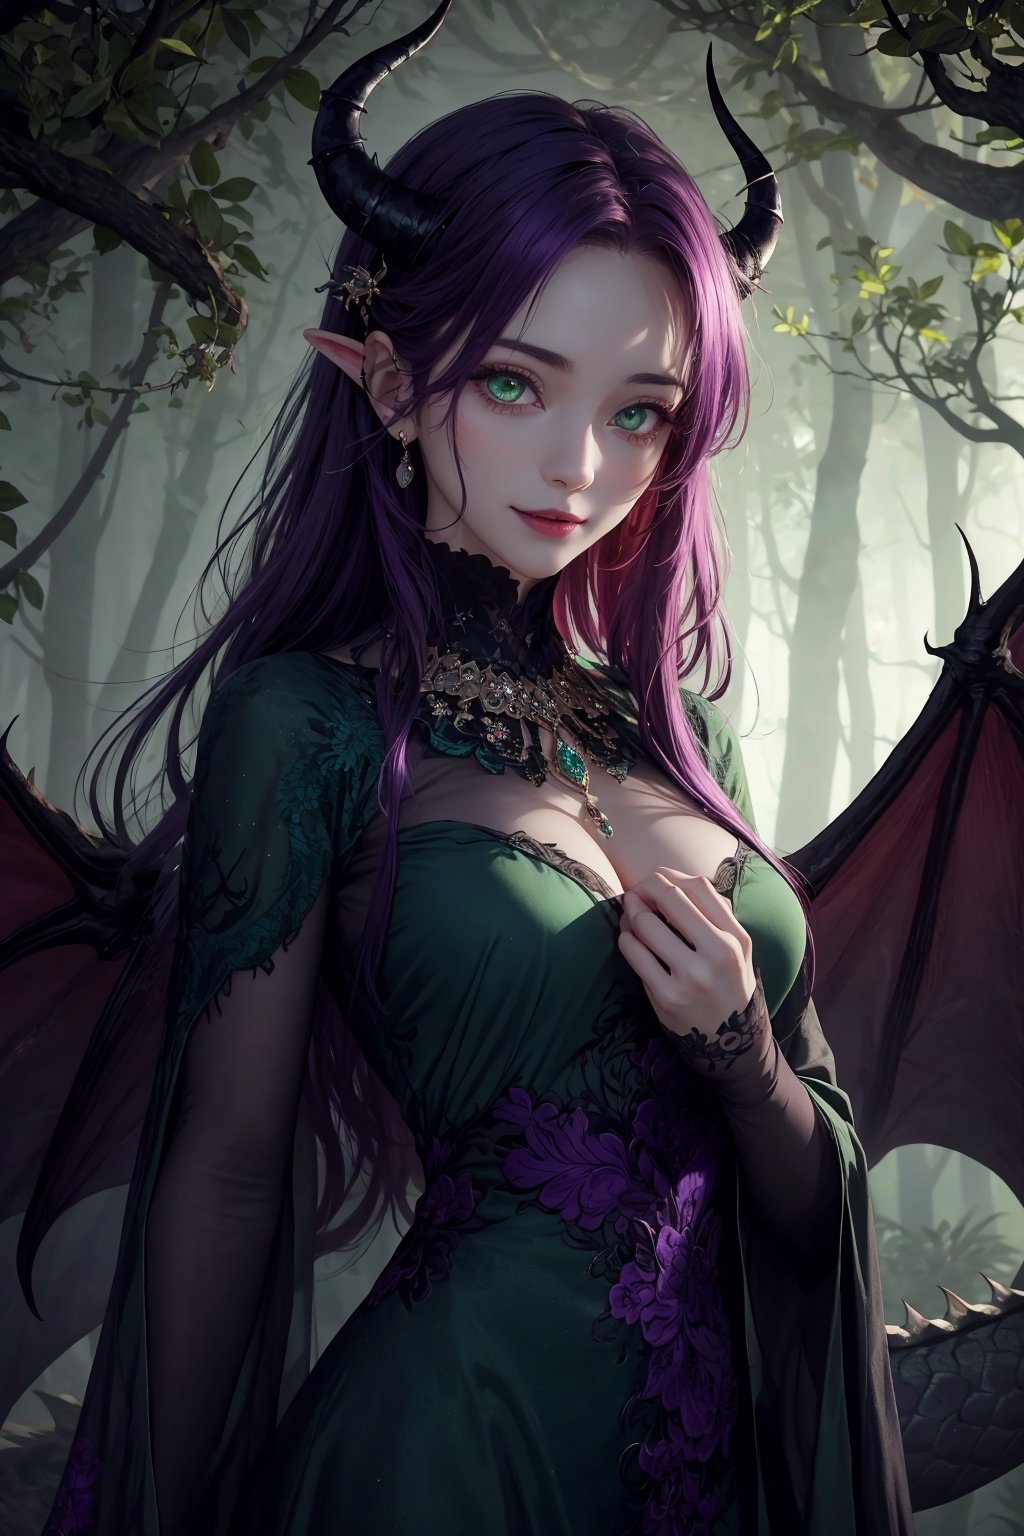 Imagine a beautiful woman with long and wild dark purple hair hair flowing freely around her. She has horns. Her dragon eyes are bright green, sparkling with intricate detail. She smiles like she is scheming something. She wears a gorgeous dress with a fine touch and she wears fine jewelery. The background is a creepy forest with dim lighting, creating an ominous ambiance. She is surrounded by sparking magic. This artwork captures a creepy atmosphere against the backdrop of a beautiful yet dimly lit setting, detailed, detail_eyes, detailed_hair, detailed_scenario, detailed_hands, detailed_background. girl, fine clothing, nilou horns, parted bangs, messy hair, bishoujo, 